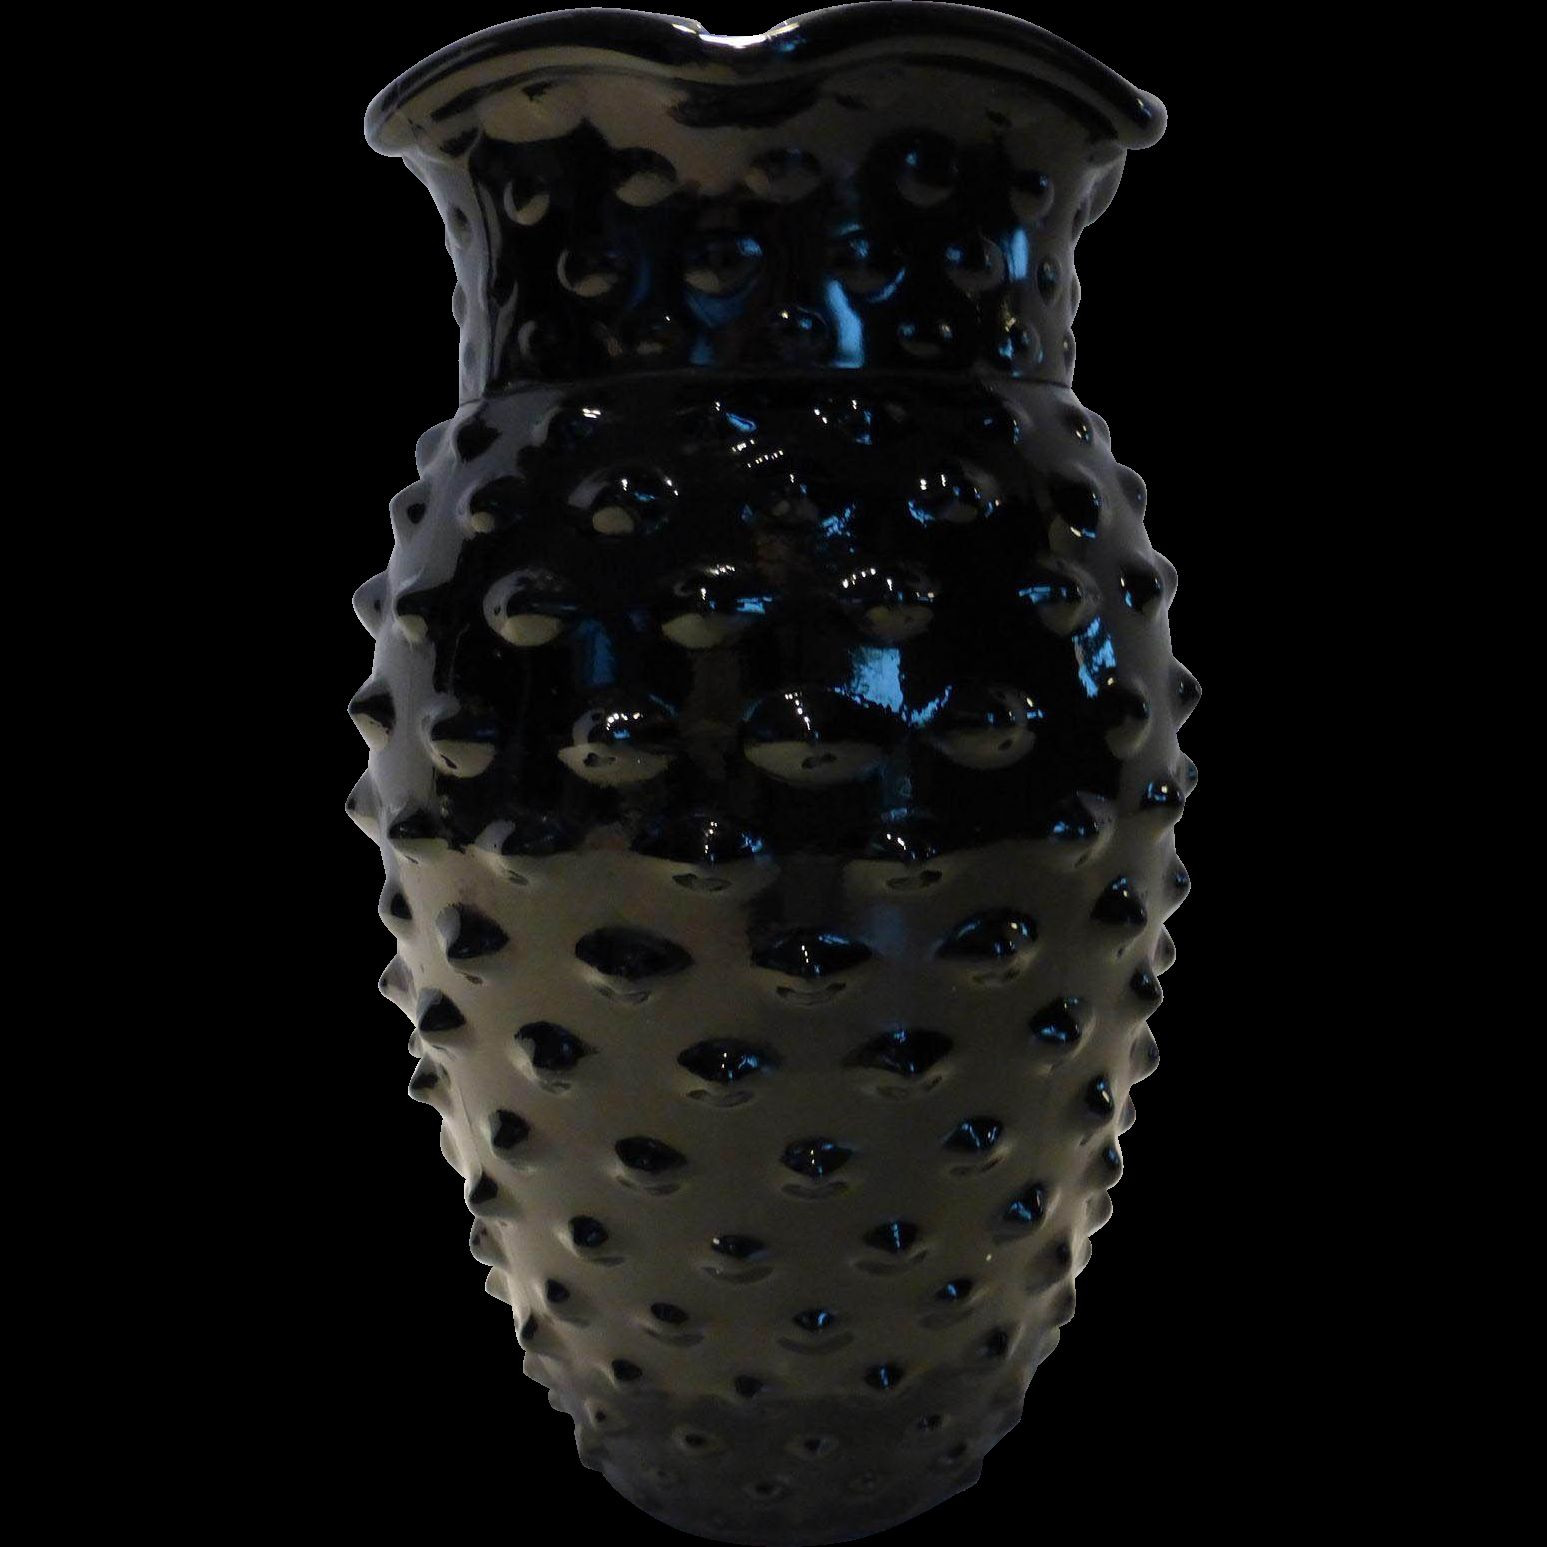 10 Stunning Bohemia Crystal Glass Vase 2024 free download bohemia crystal glass vase of 22 hobnail glass vase the weekly world throughout download wallpaper large black glass vase